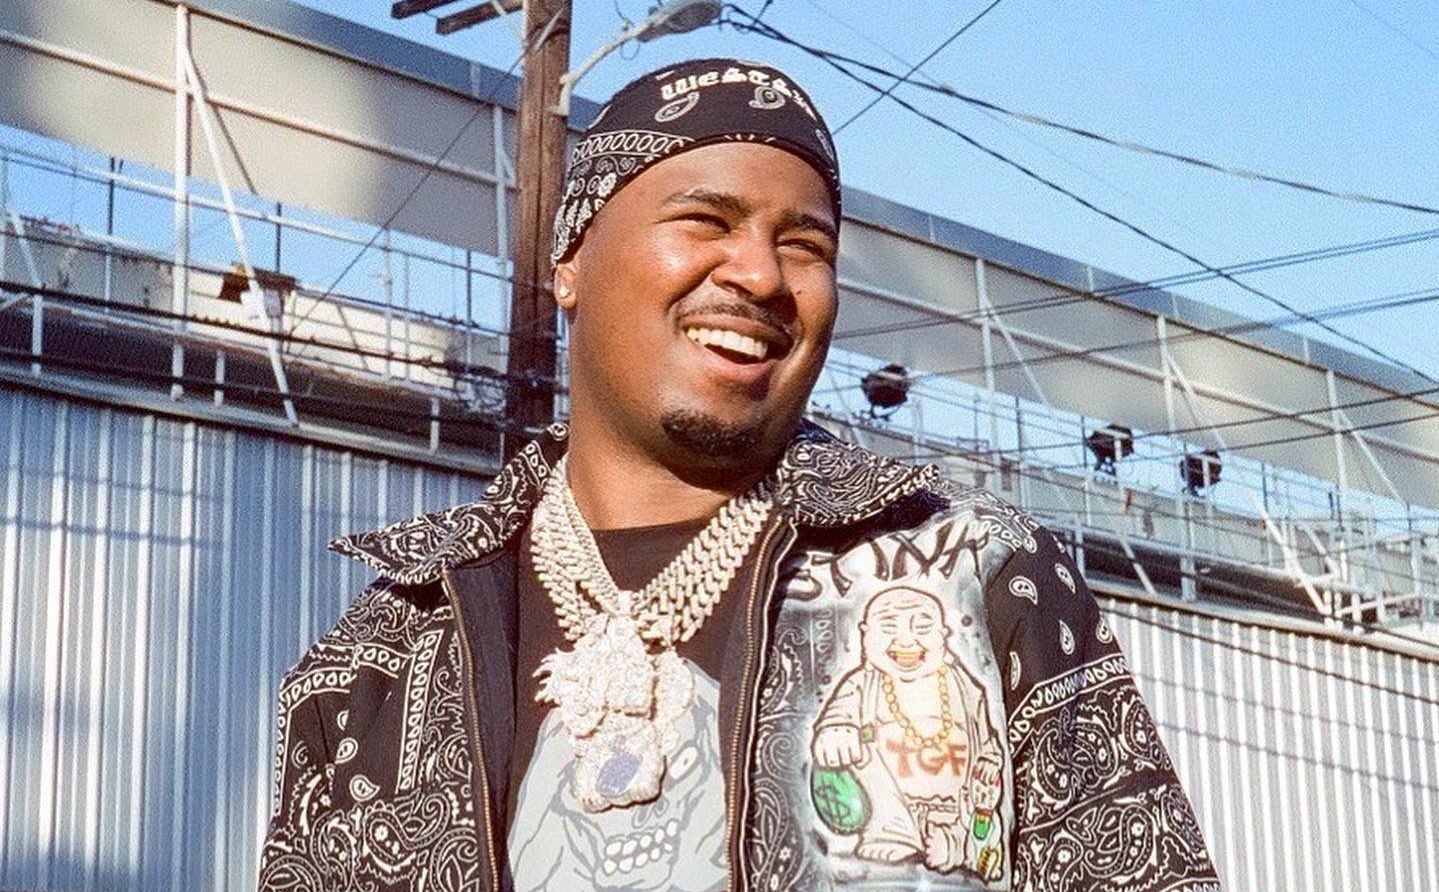 Rapper Drakeo The Ruler died of injuries in Los Angeles